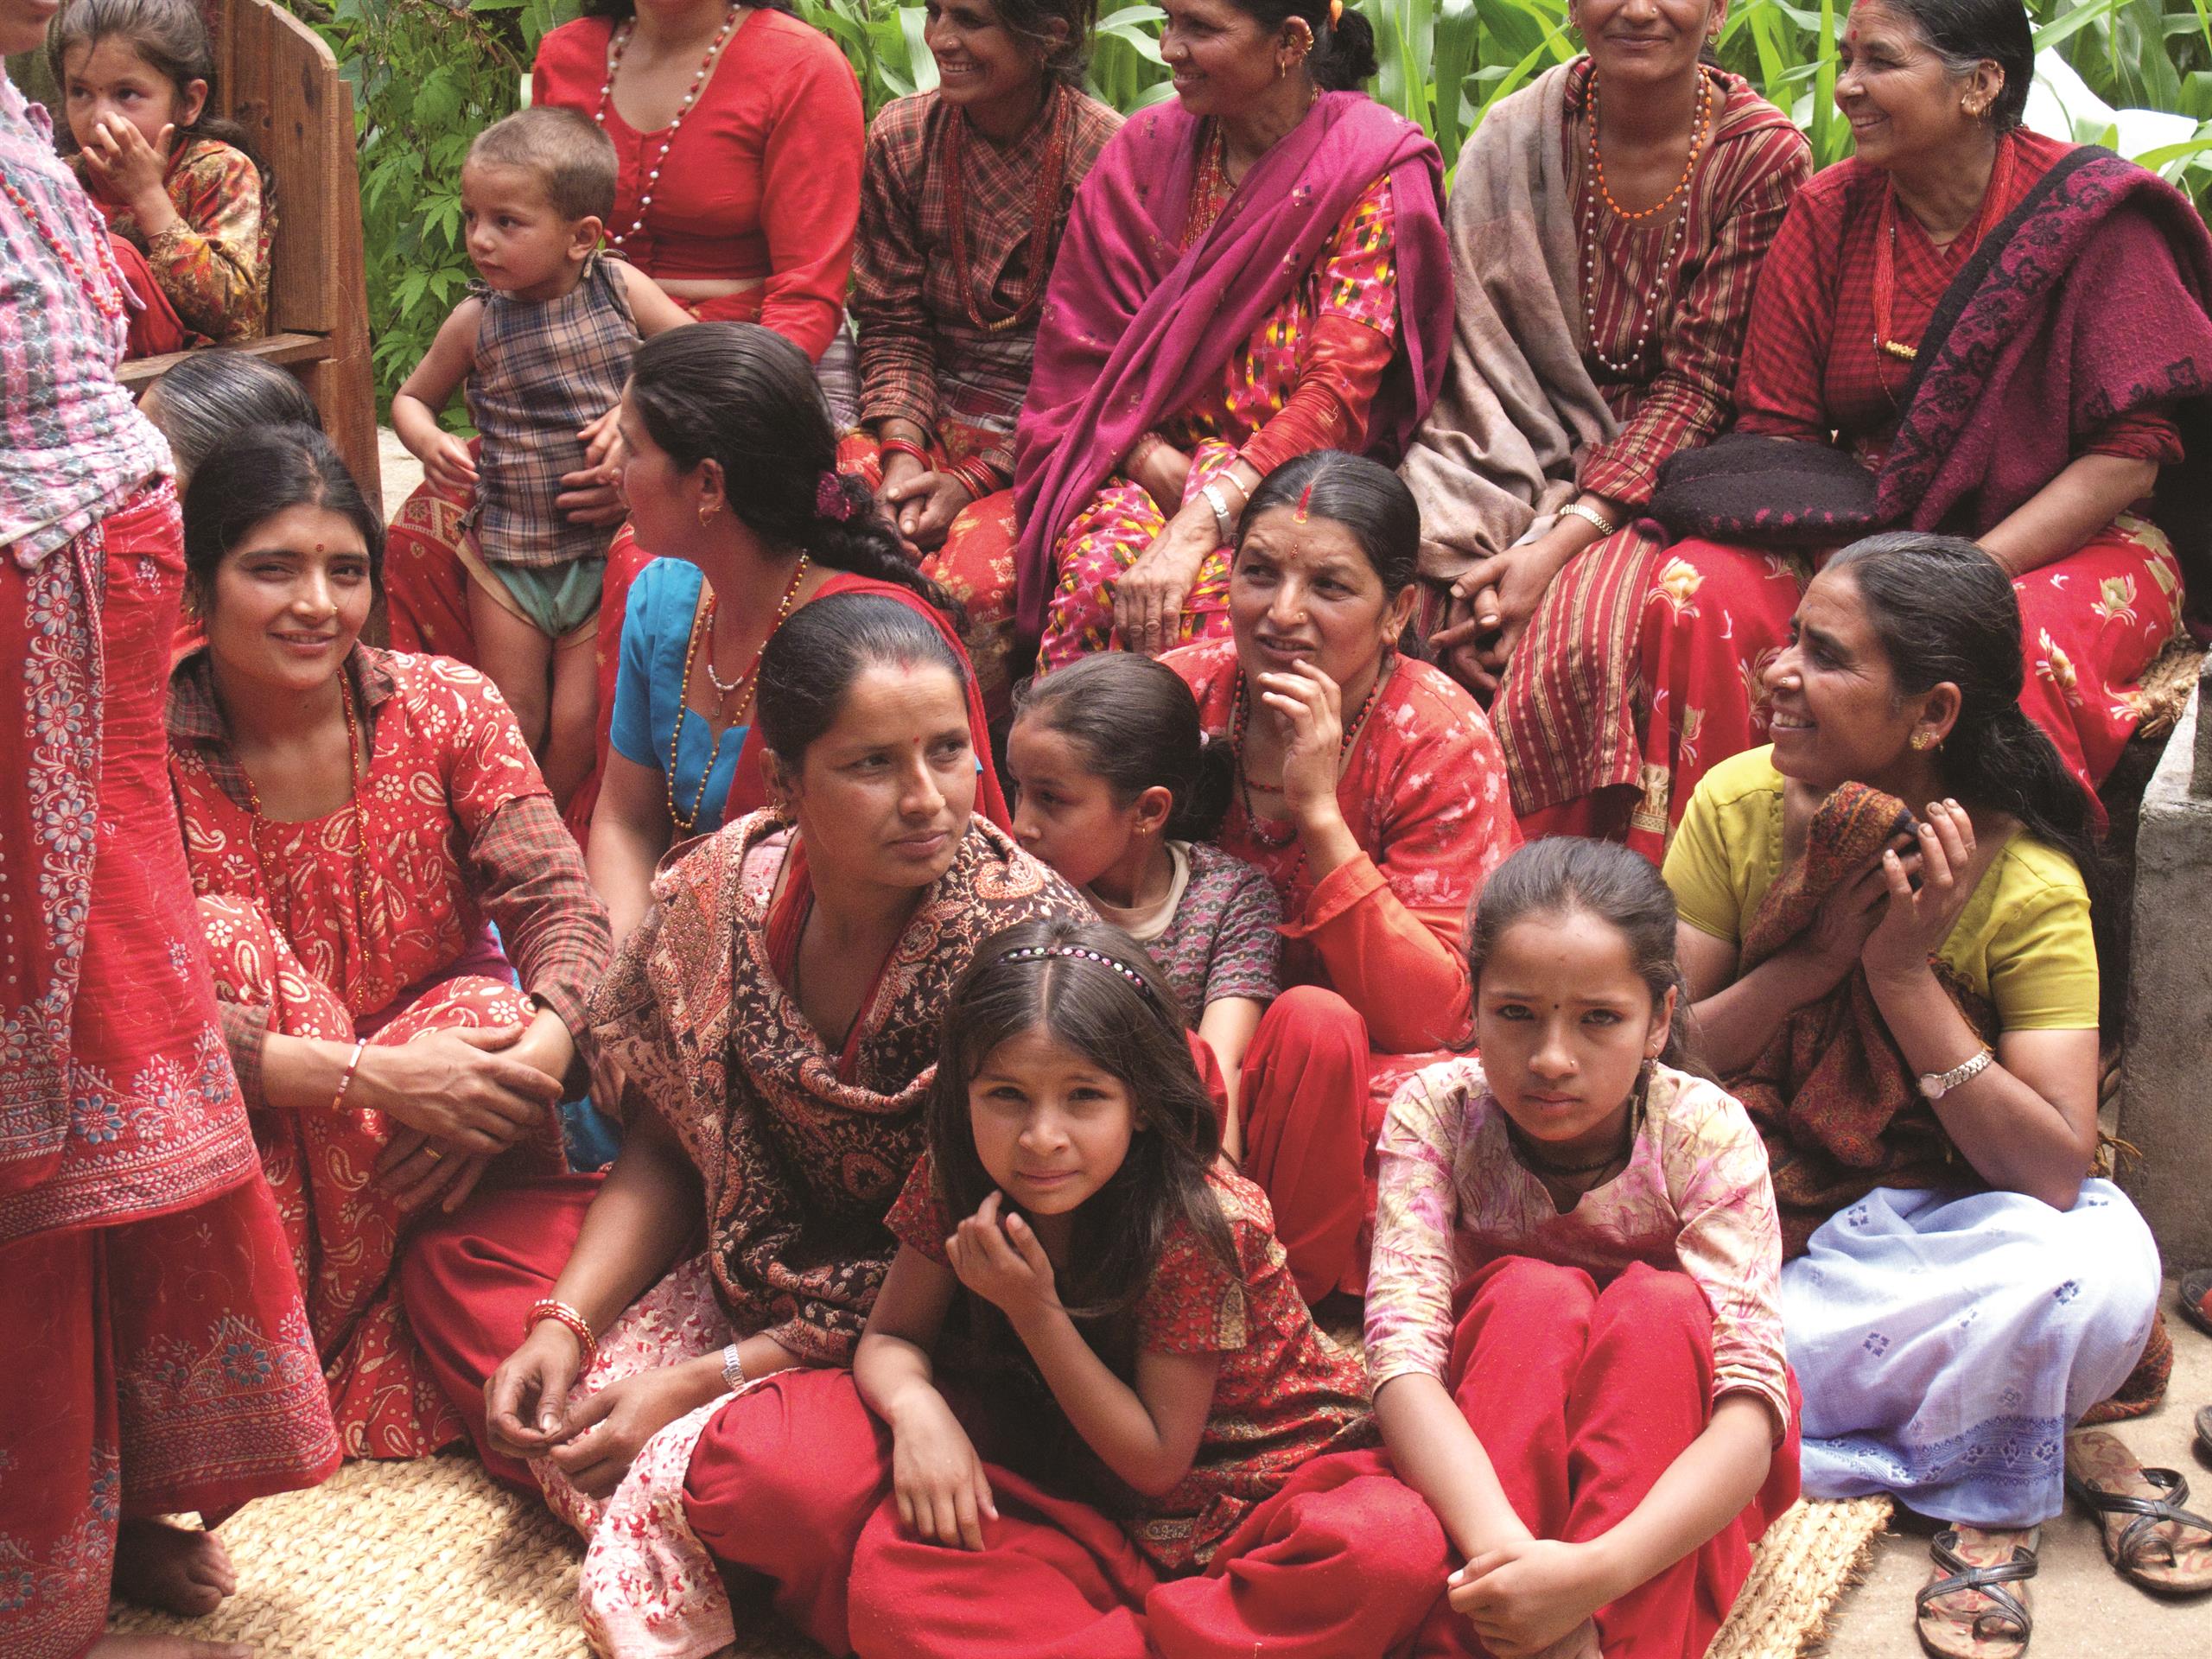 image of Nepalese women and girls seated at gathering